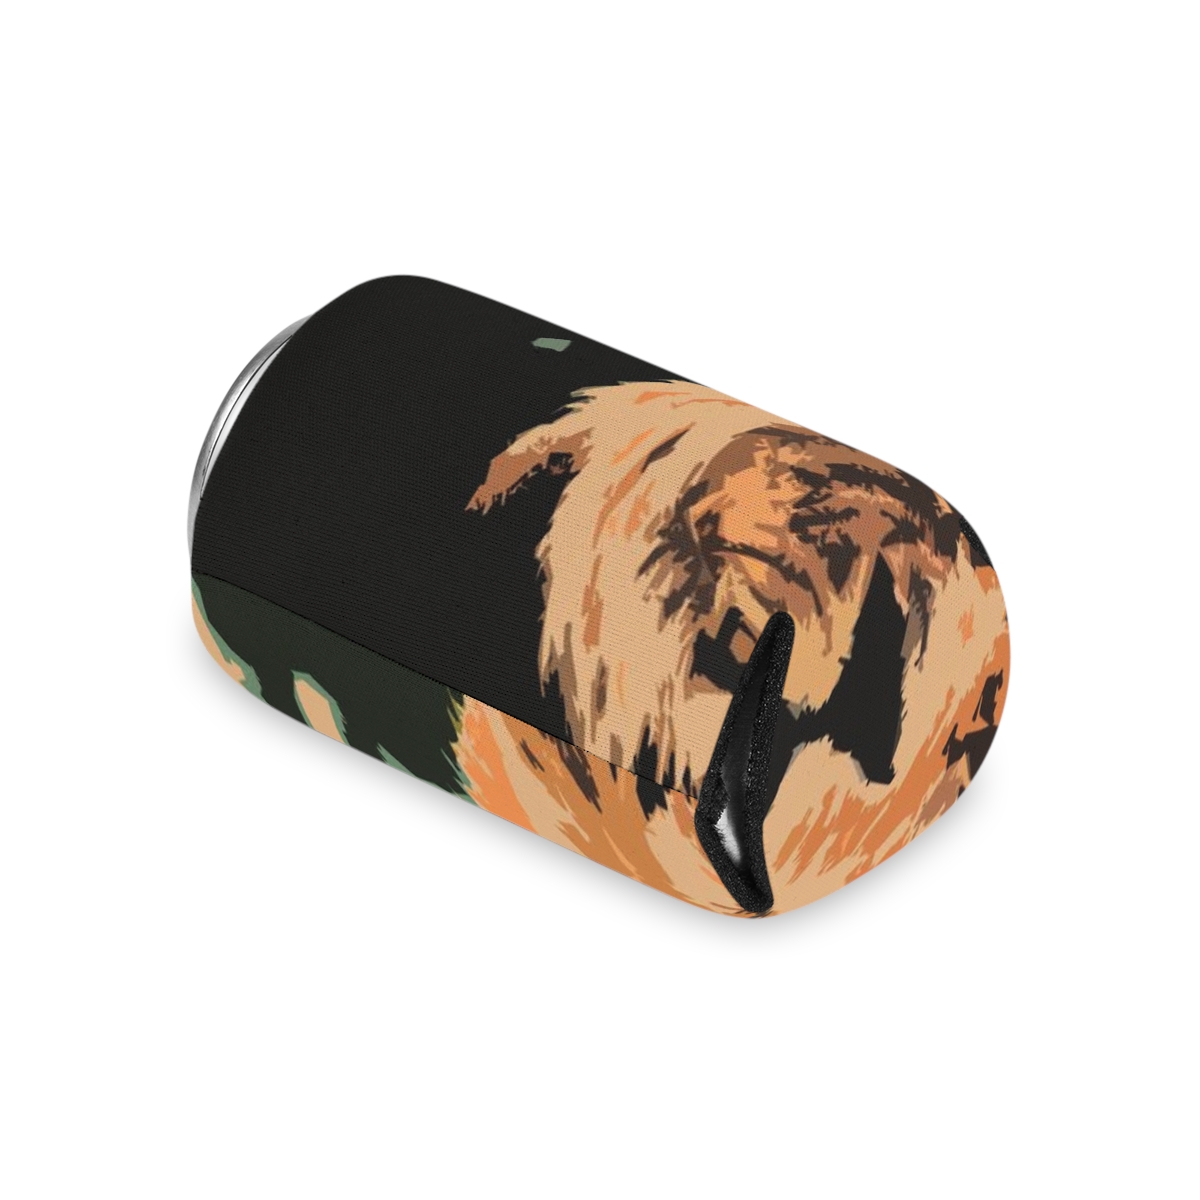 Lion - Can Cooler product thumbnail image